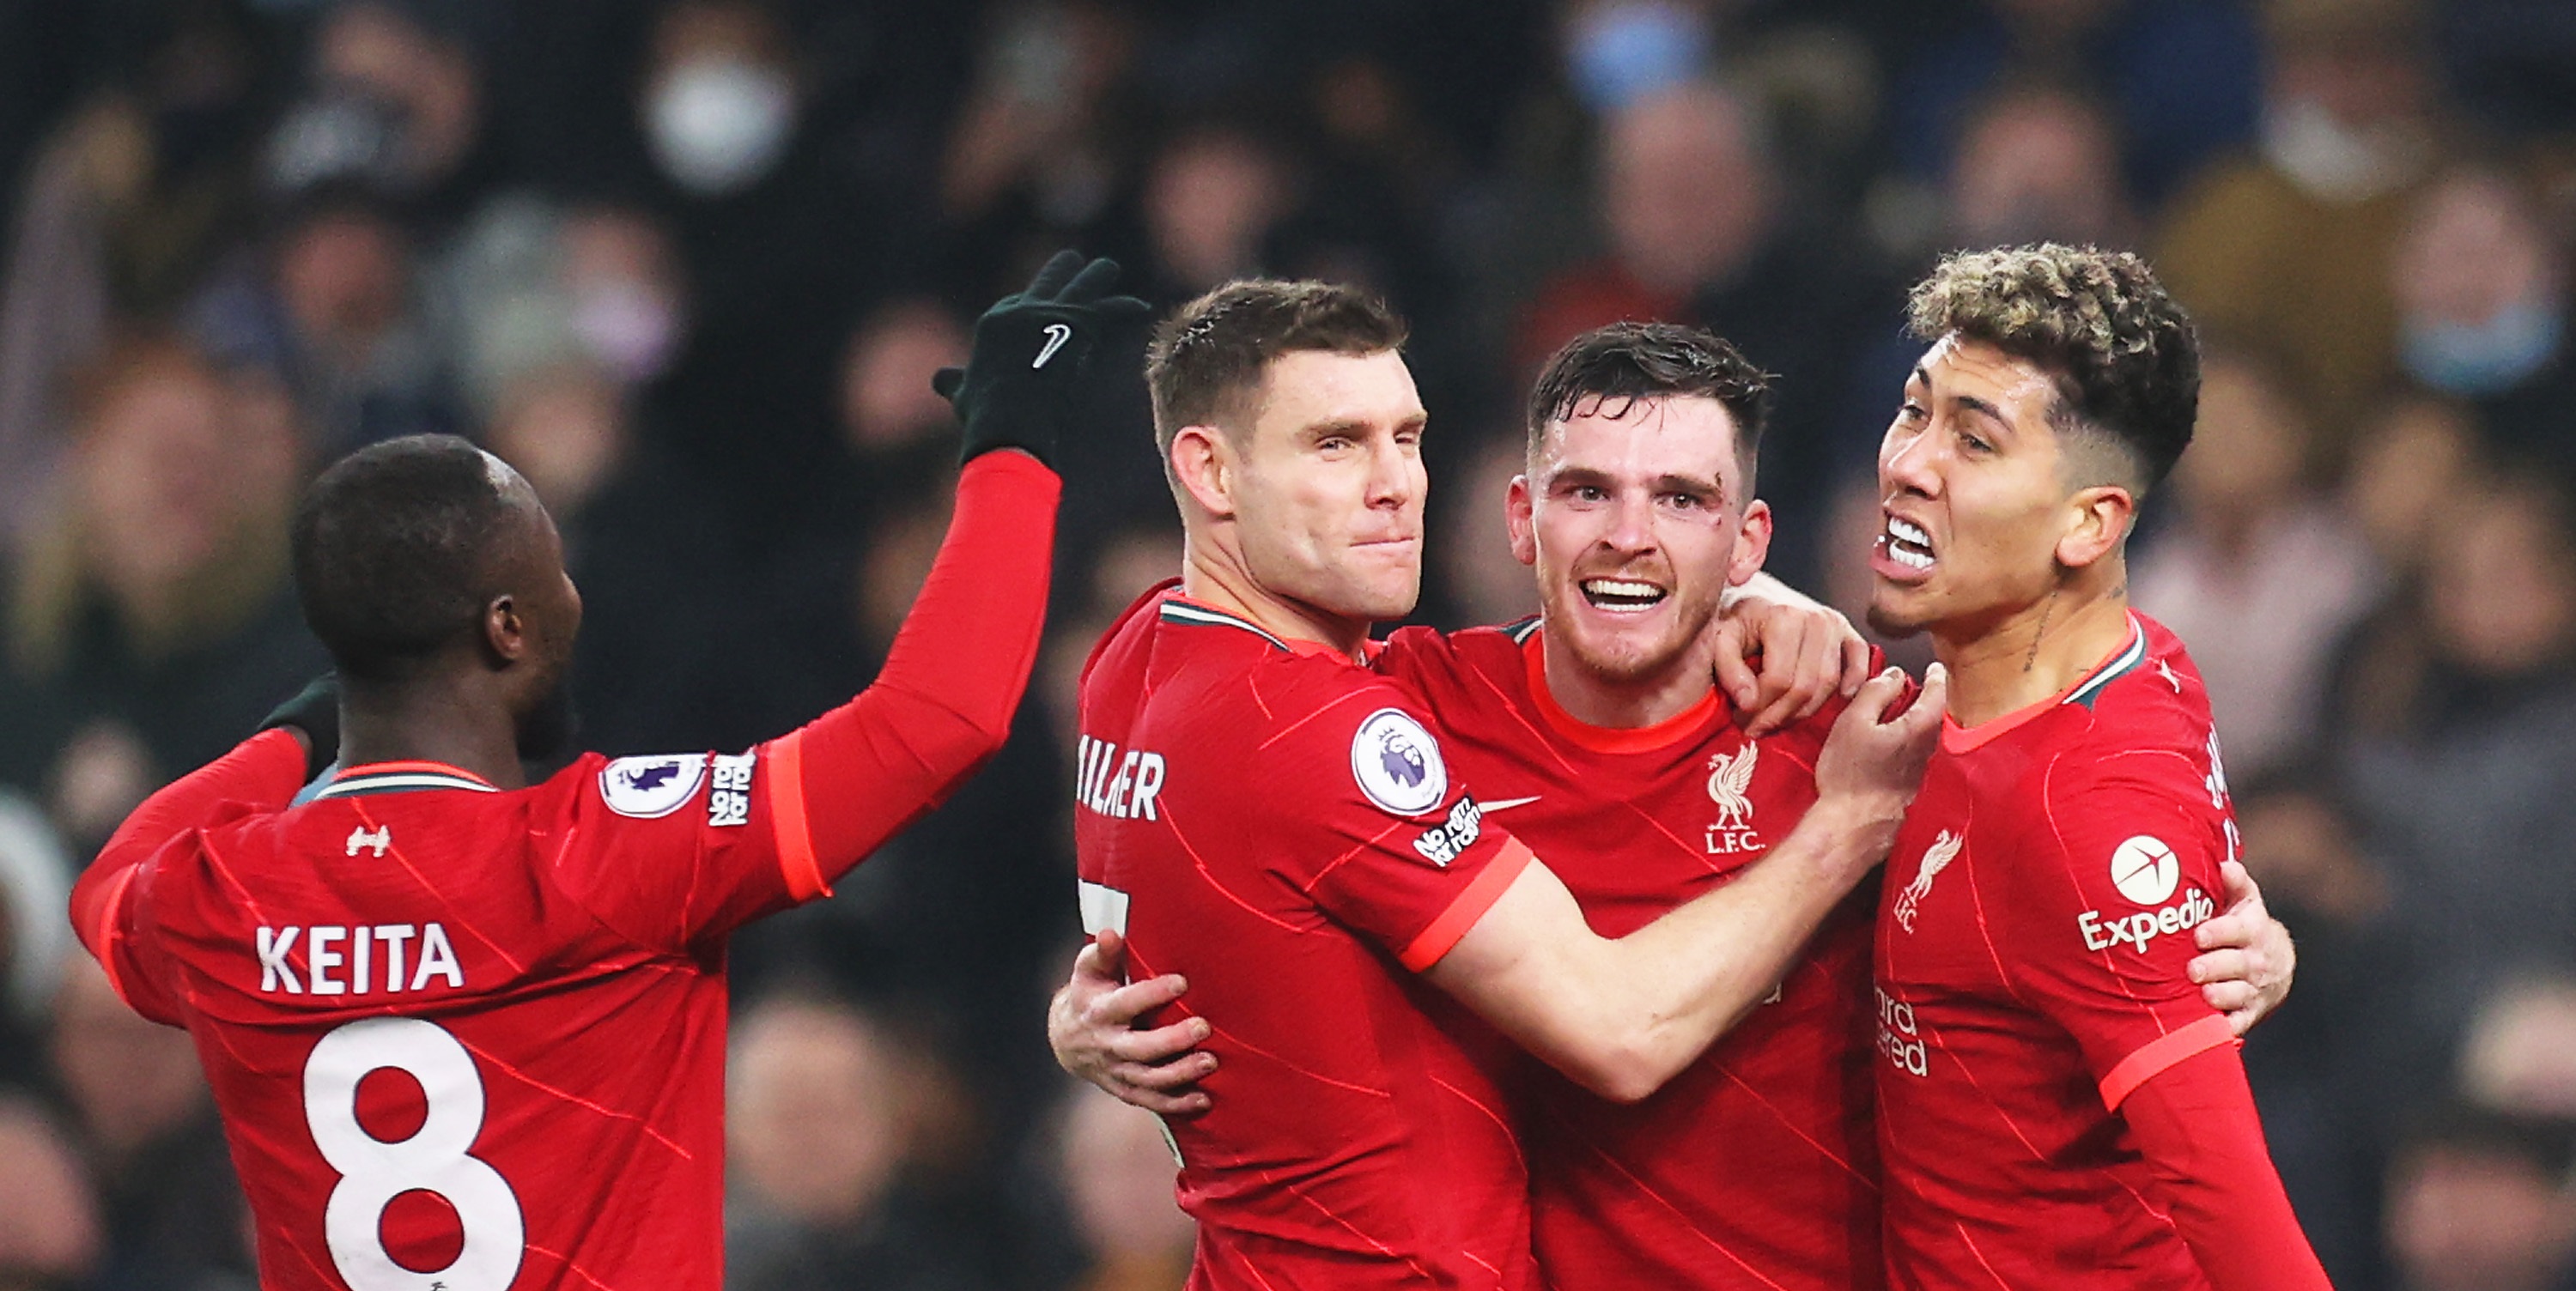 ‘You’re stuck with me’ – James Milner sends brilliant message to Liverpool fans as the 36-year-old signs a one-year contract extension at Anfield